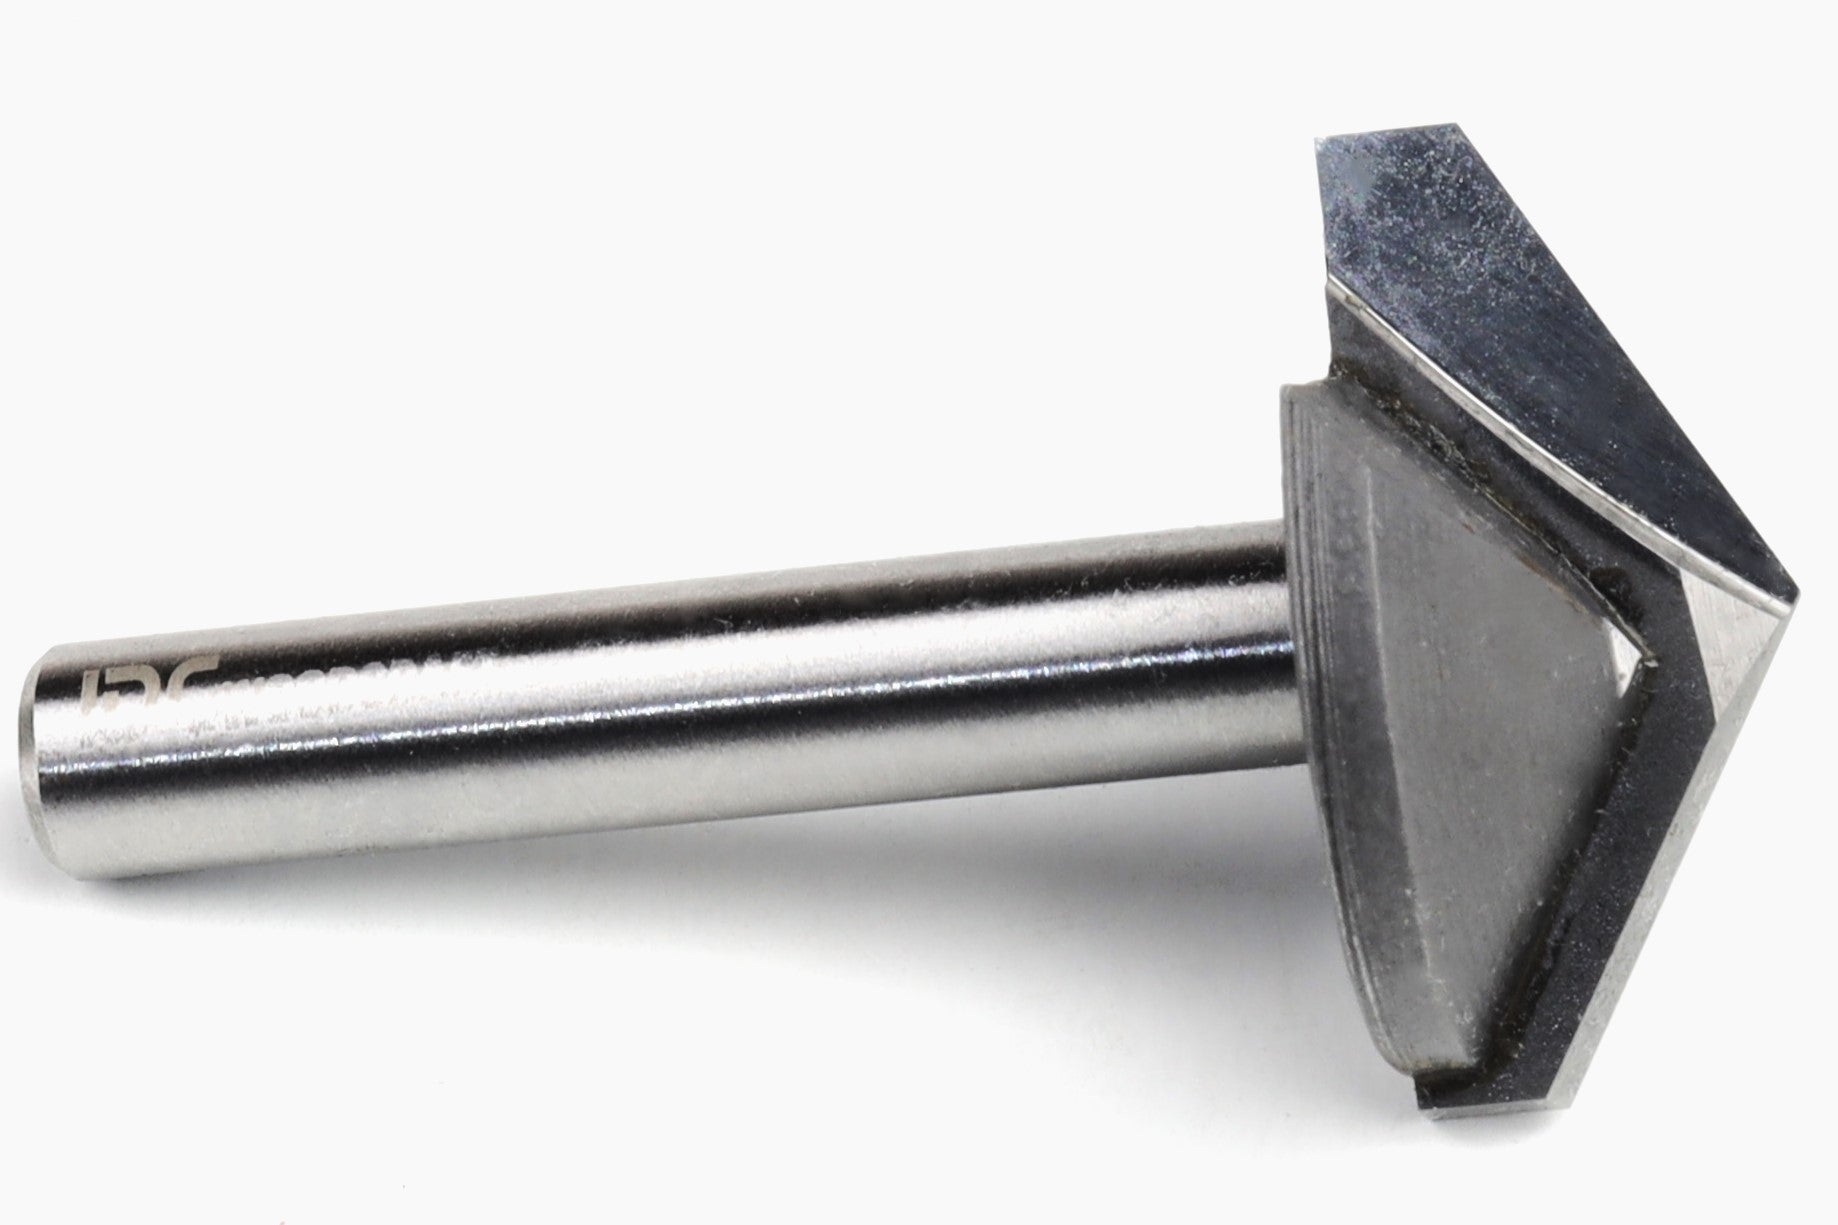 120 Degree Wide-Cutting V Bit 1/4" Shank for CNC Routers